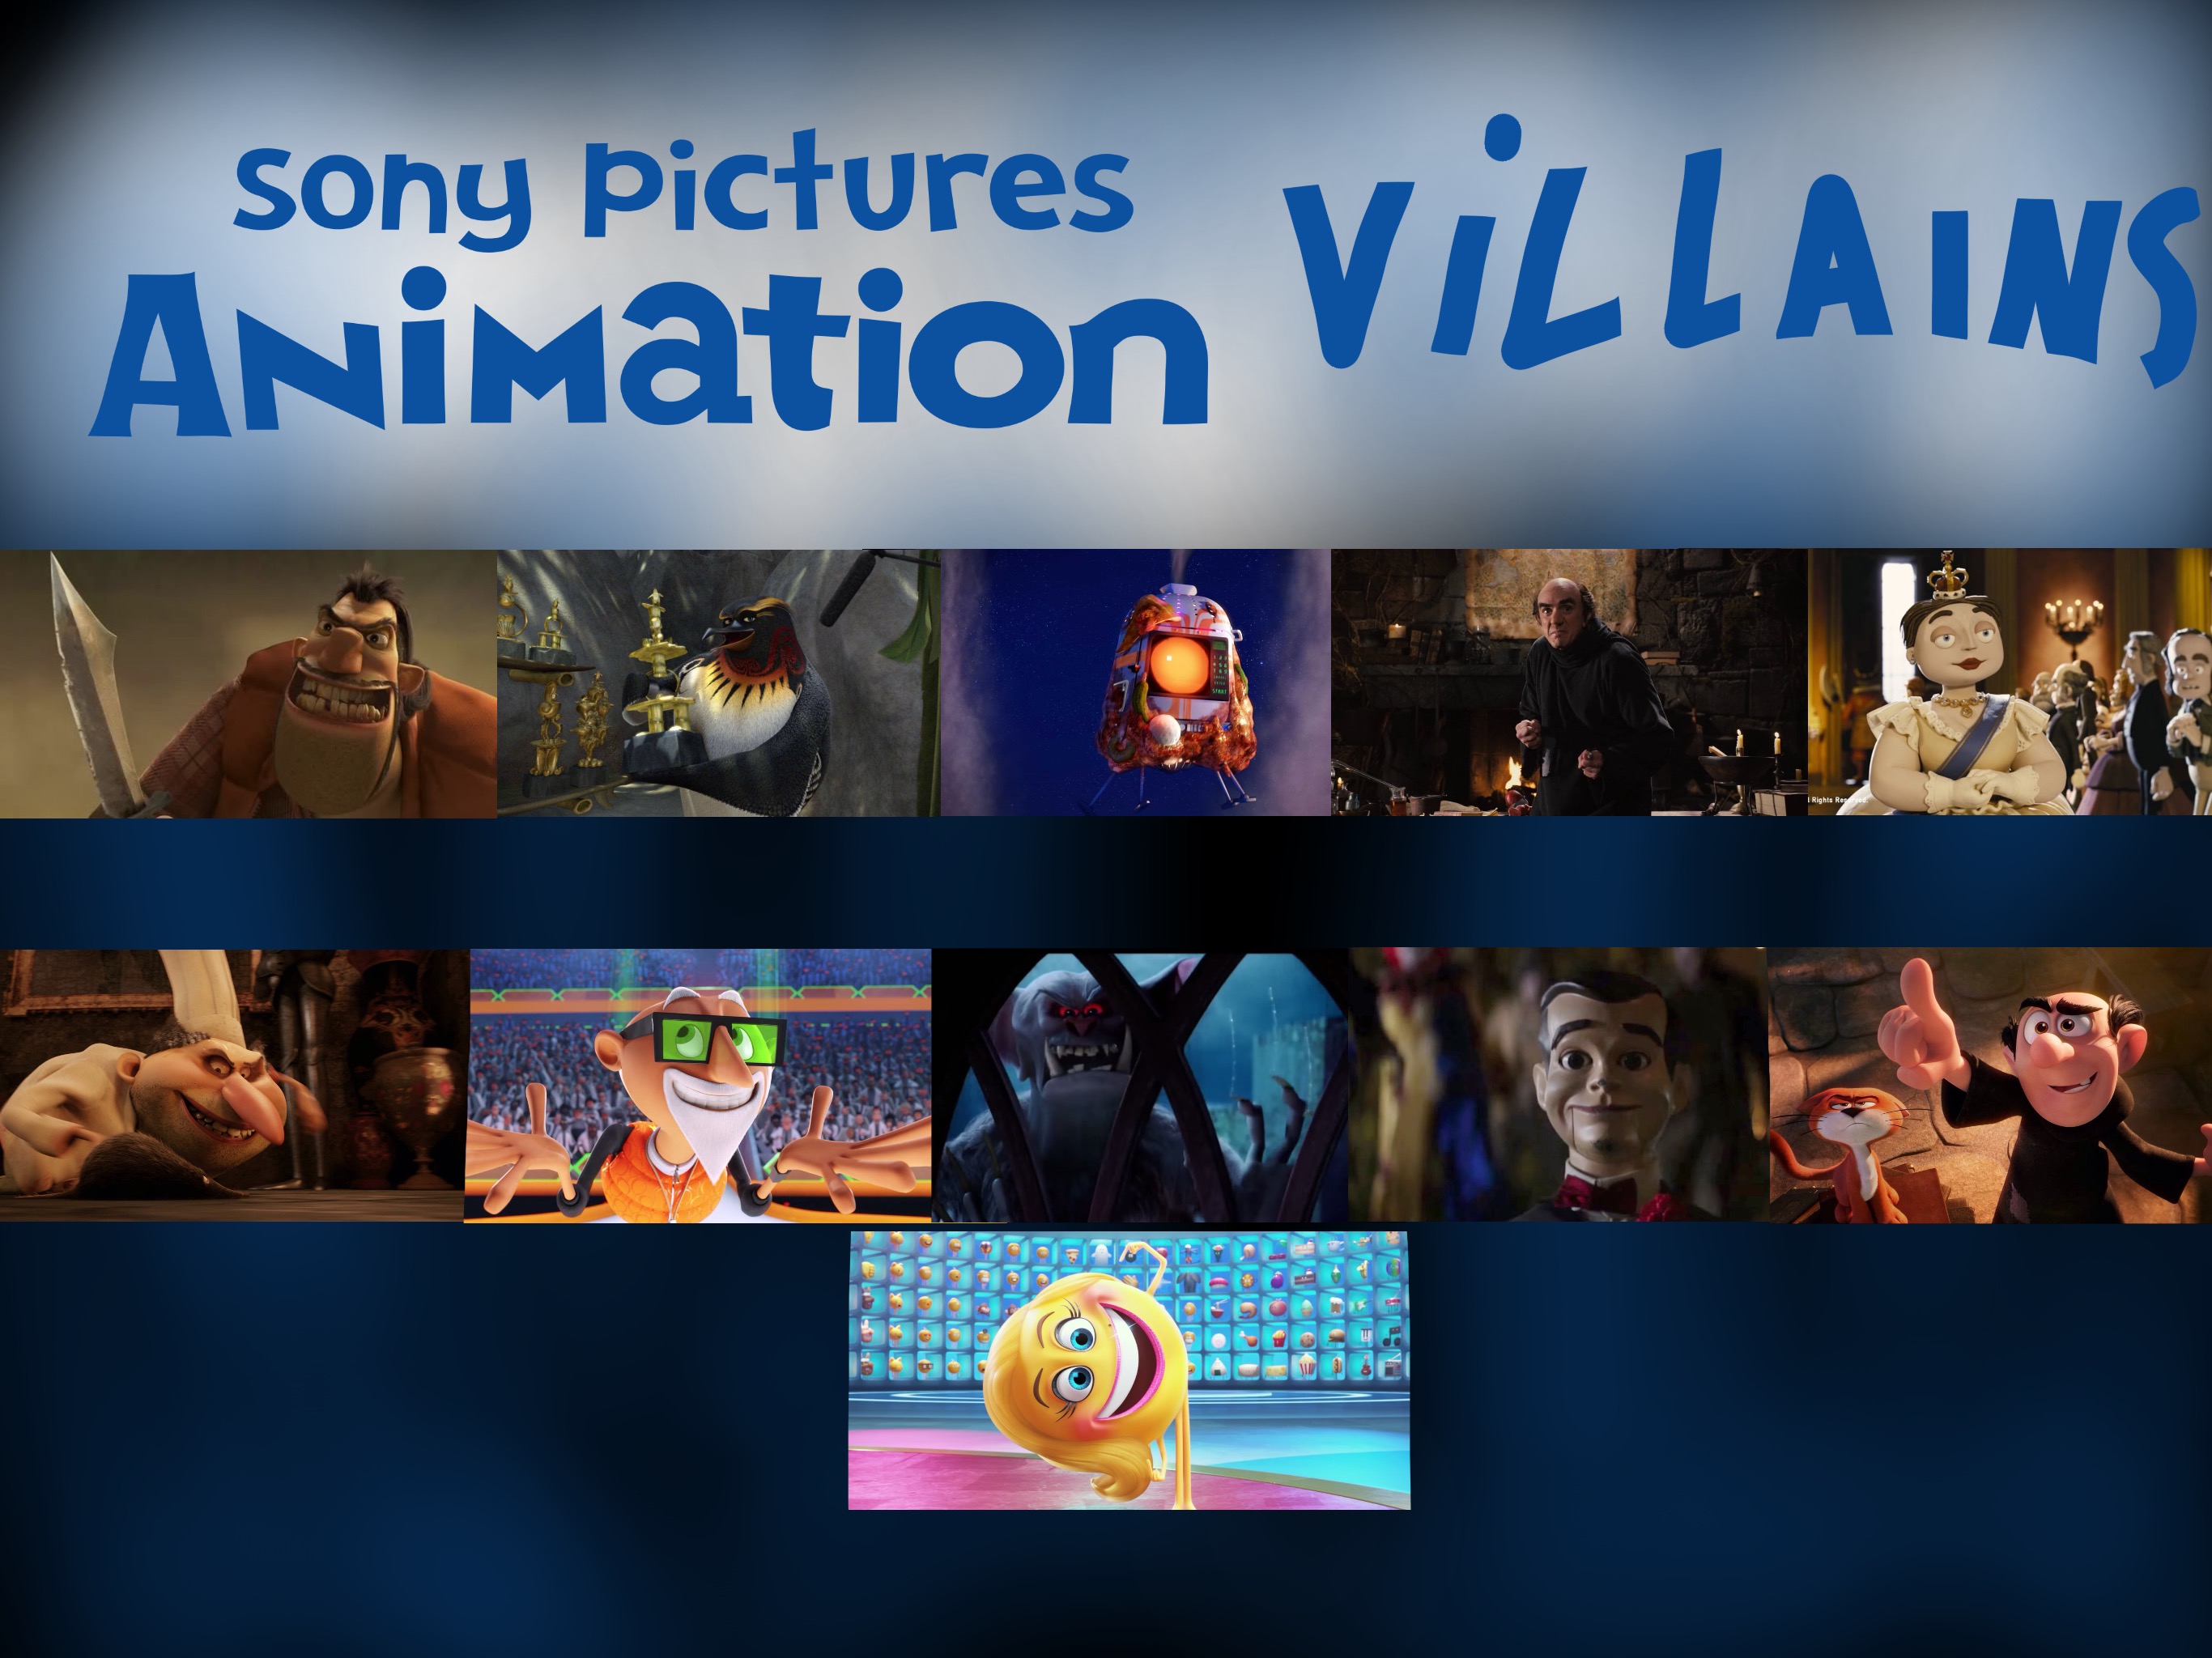 sony-pictures-animation-villains-by-justsomepainter11-on-deviantart